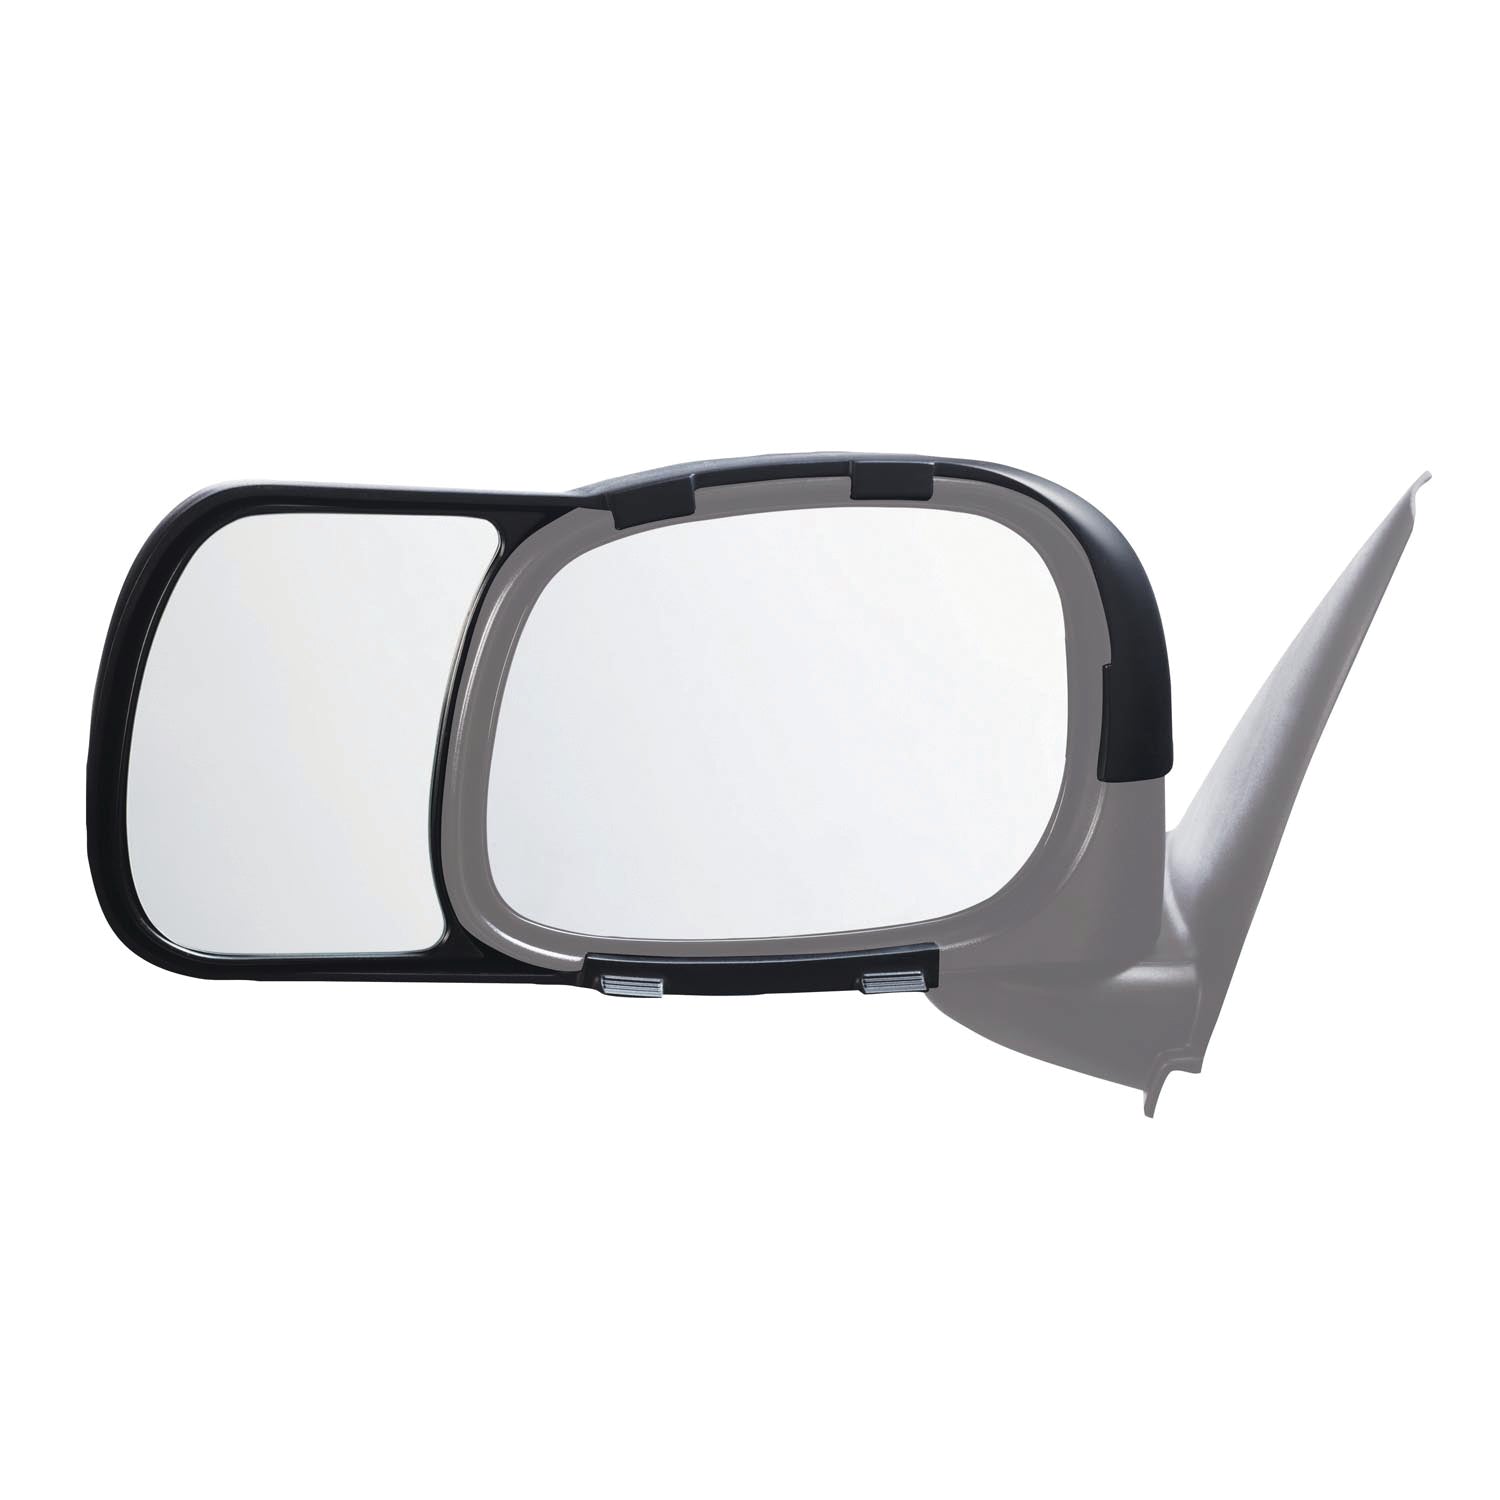 K-Source 80700 Snap-On Towing Mirrors For Dodge Ram 1500 (02-06), 2500/3500 (03-09)